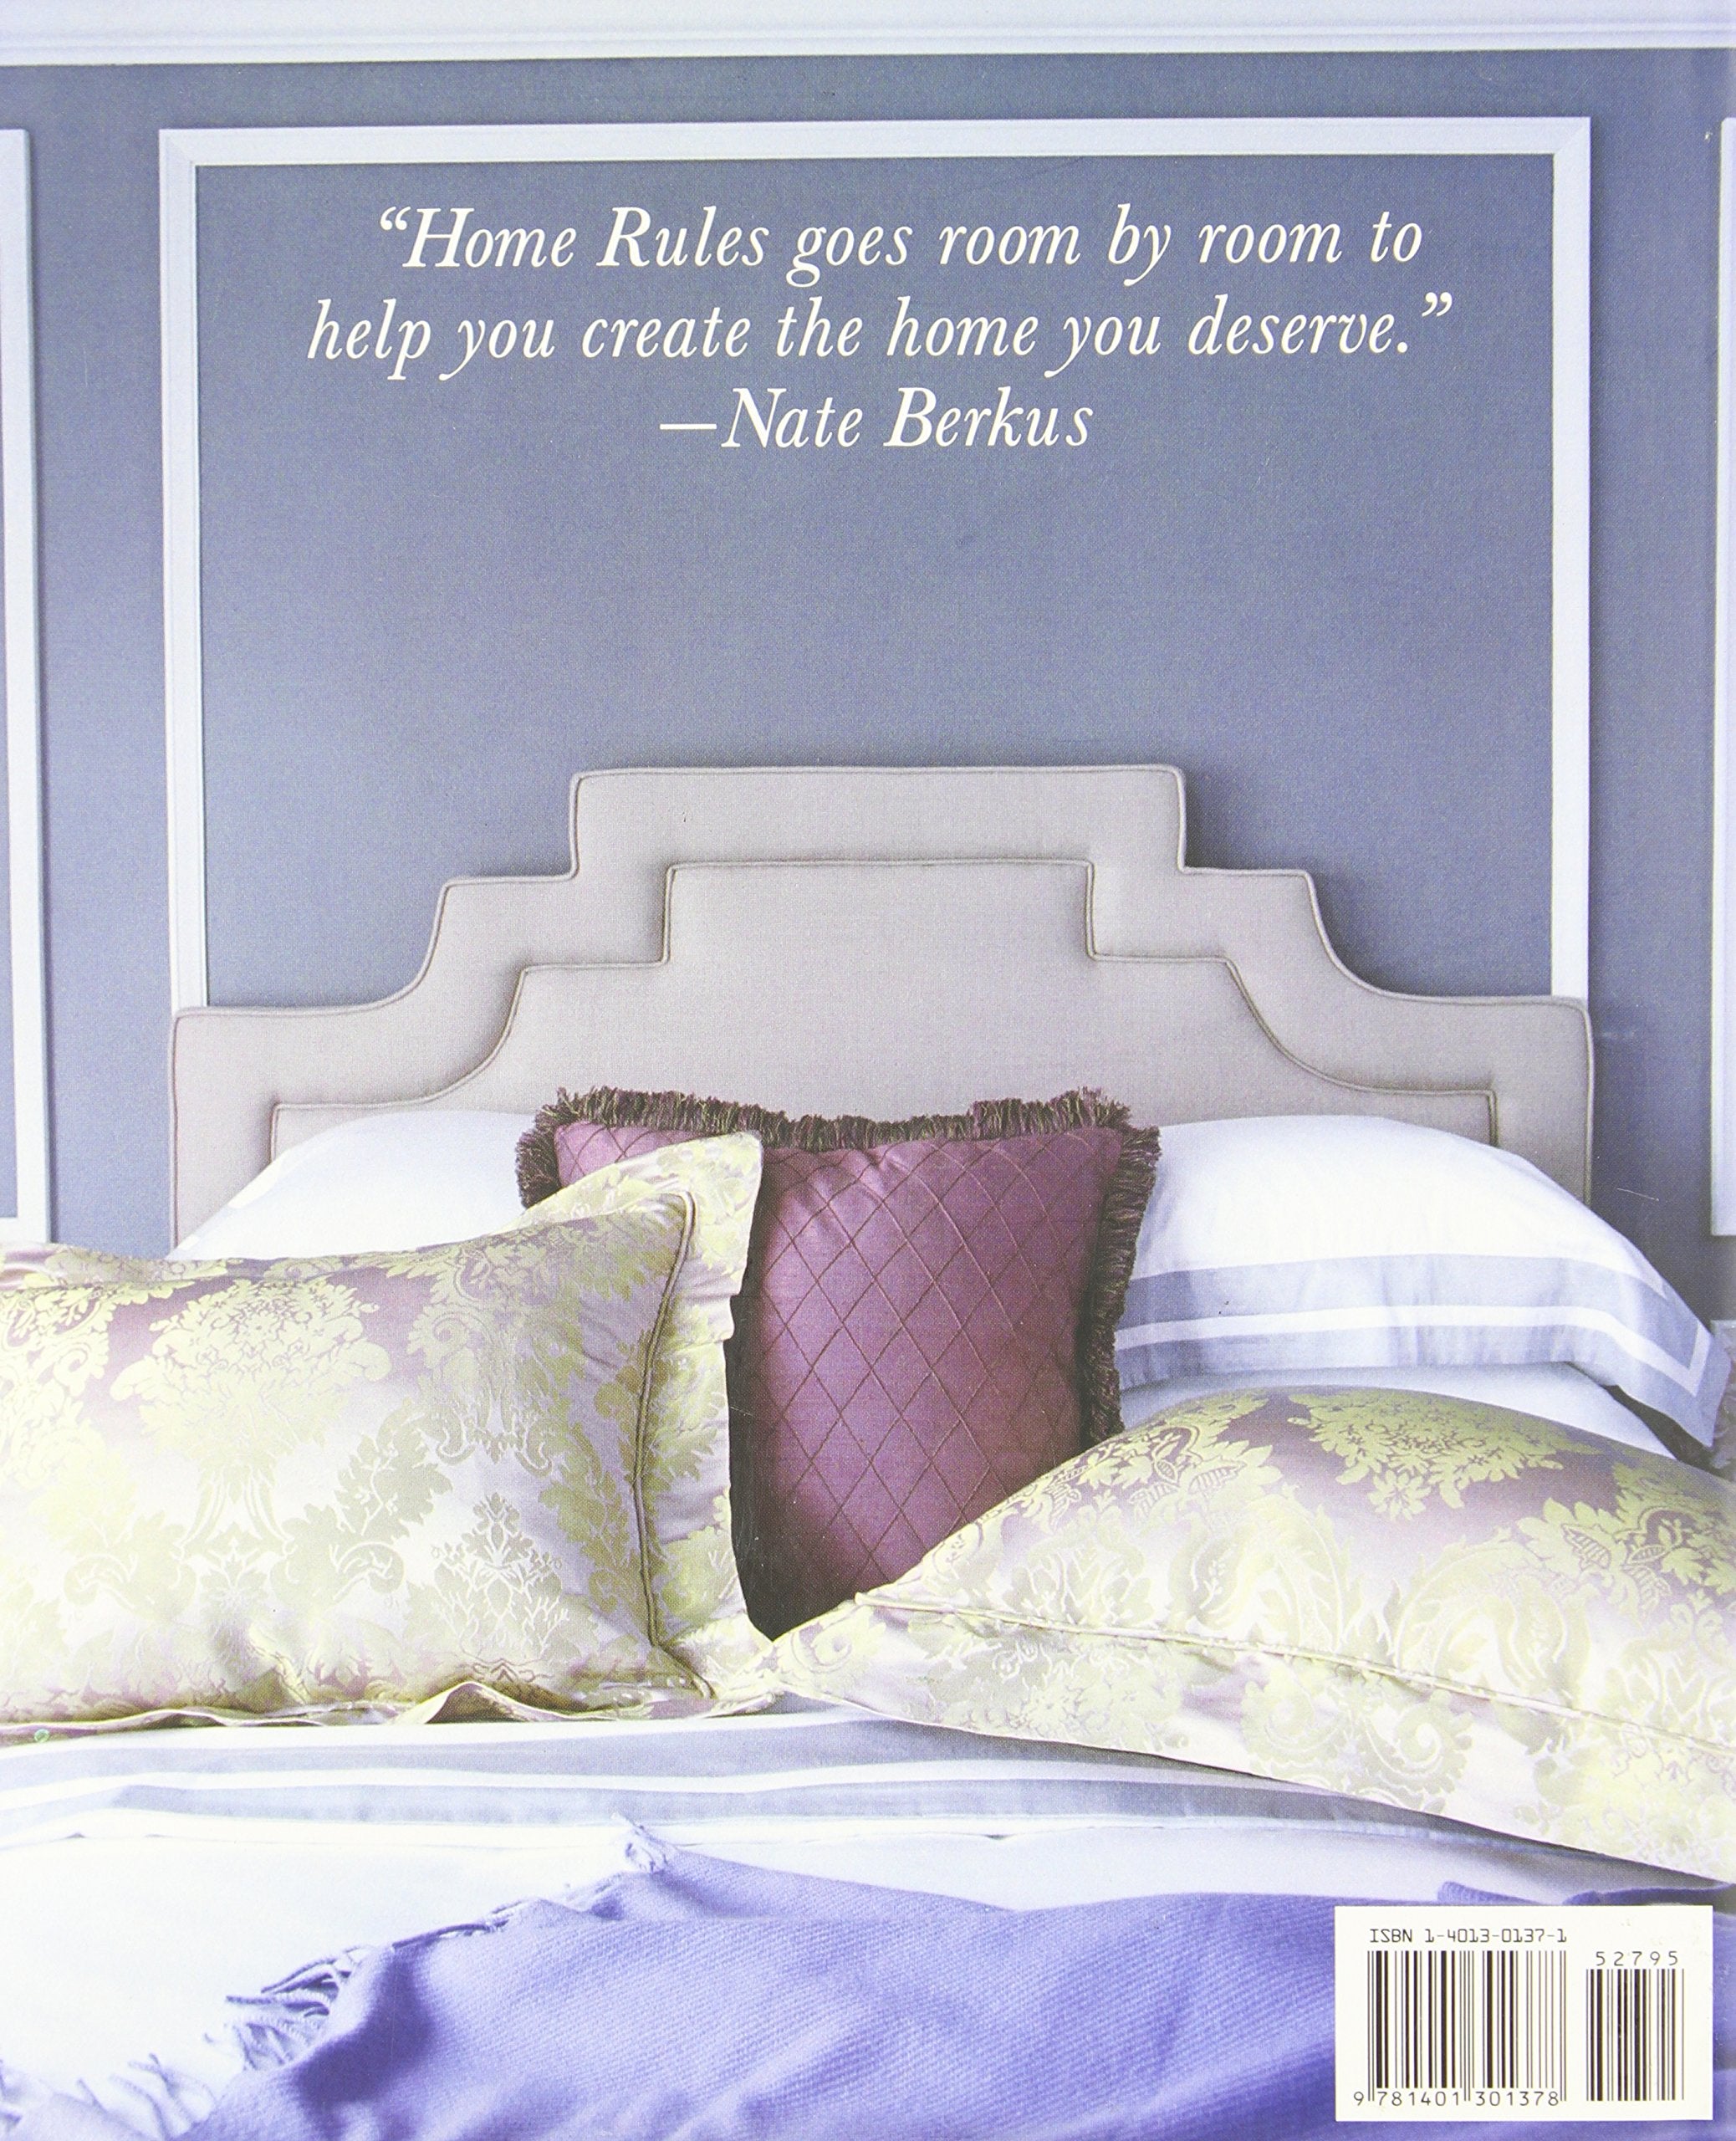 Home Rules: Transform the Place You Live into a Place You'll Love (Nate Berkus)